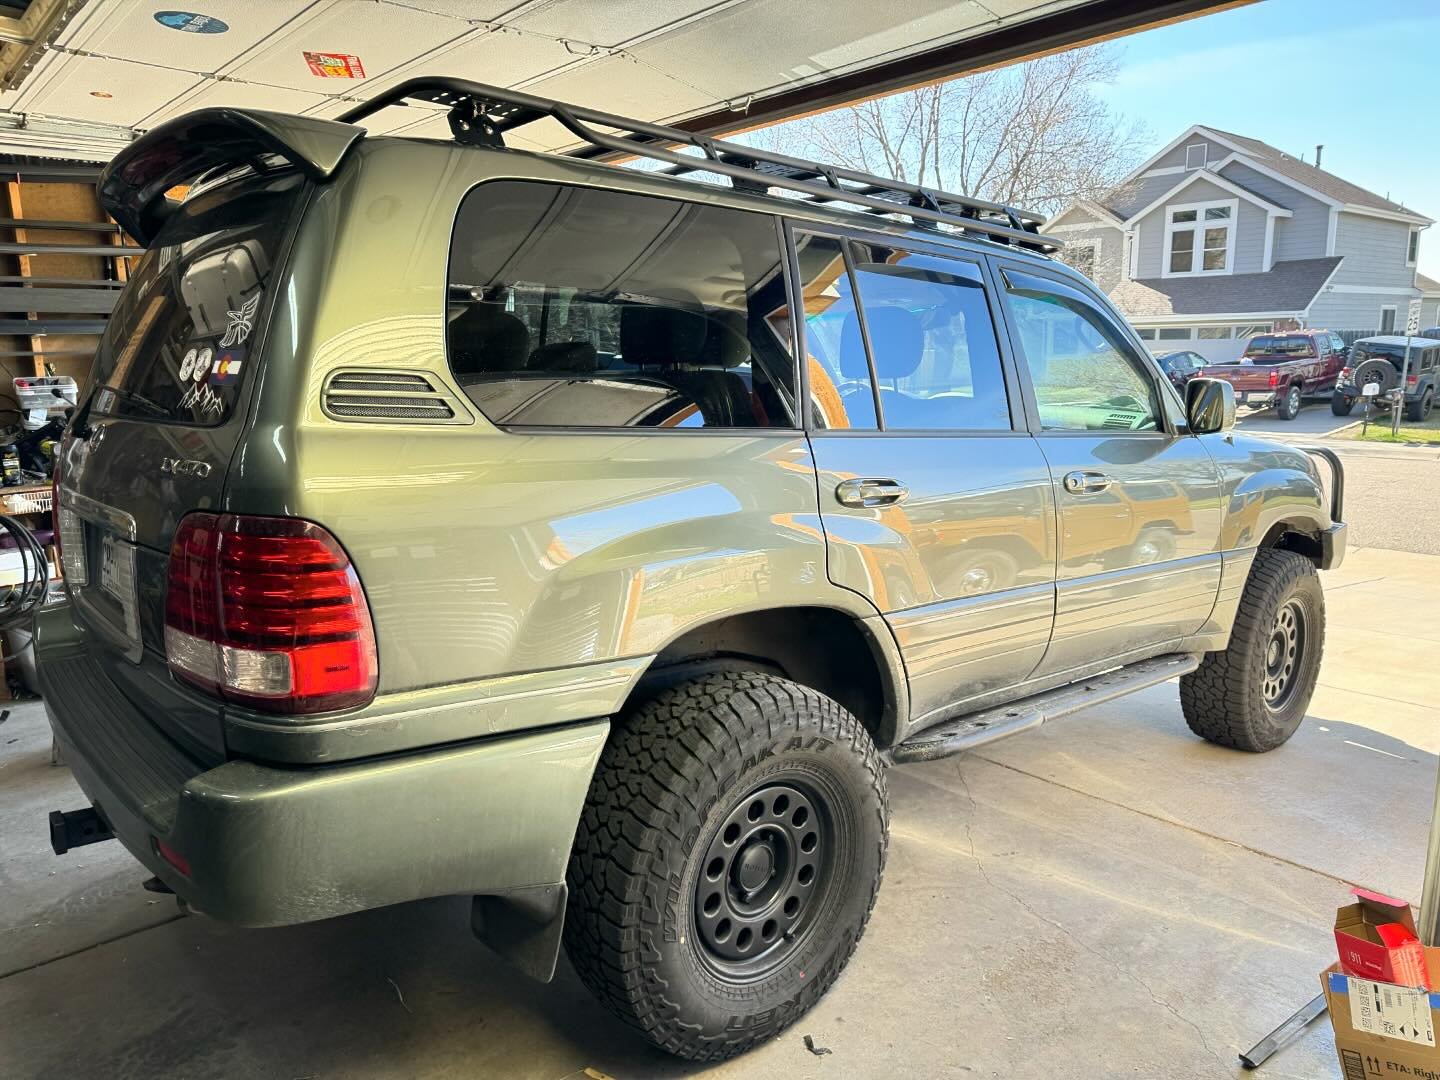 Today&rsquo;s install&hellip; cypress green mica!  #essentialexpo rack on an #lx470 #100serieslandcuiser .  Who else has this color?  Have a great week all.  #ih8mud #lexuslx470 #roofrack